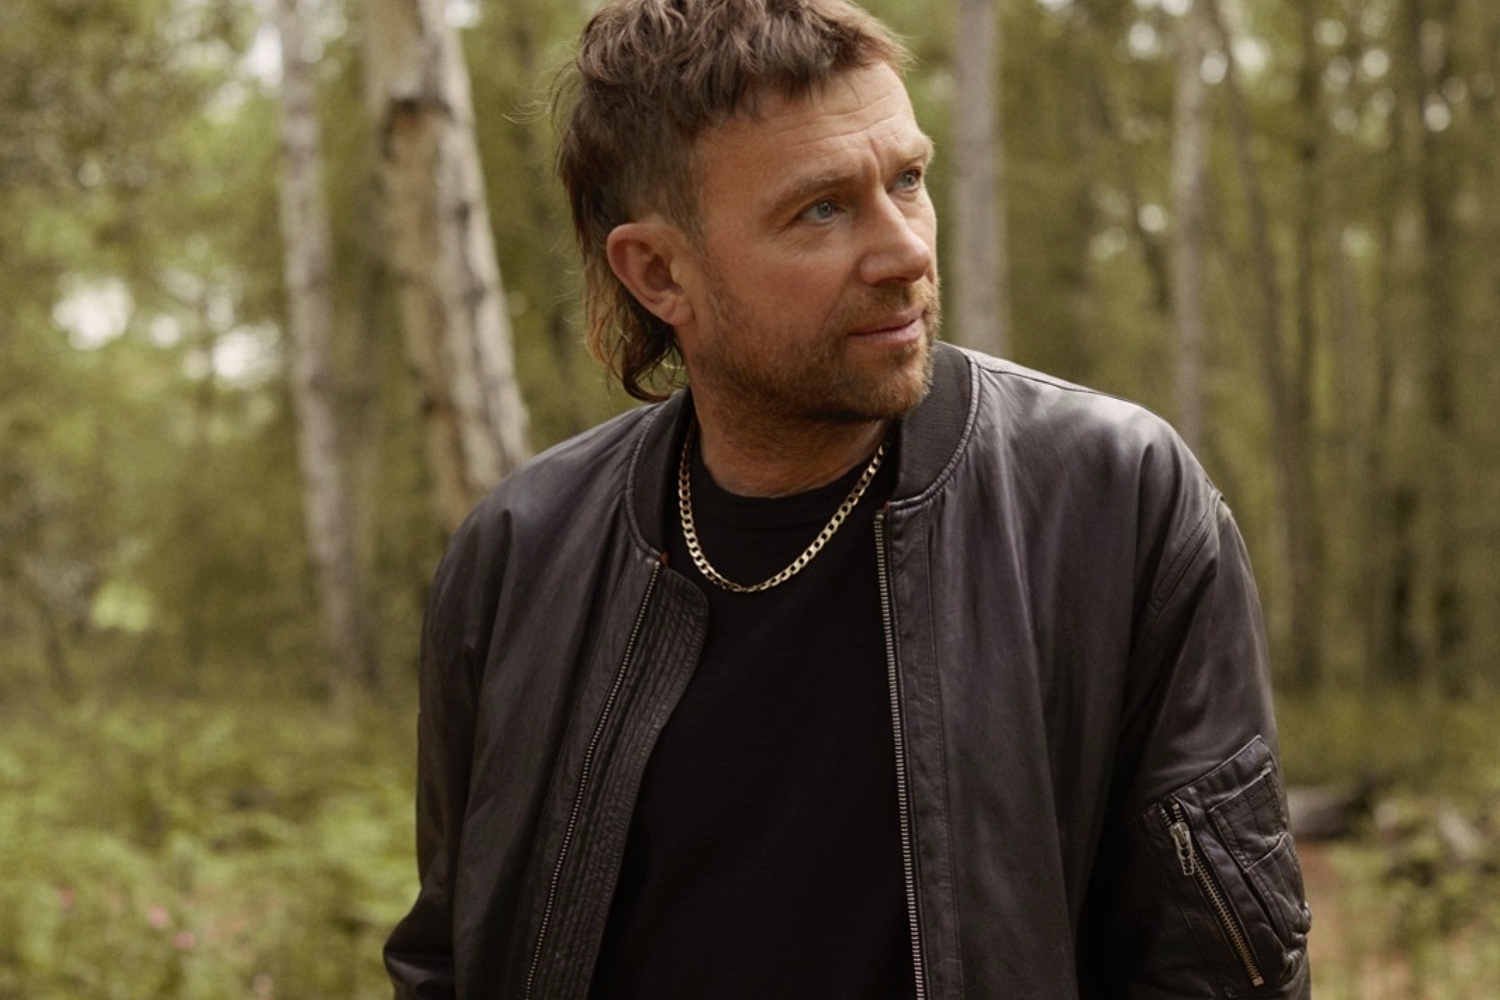 Damon Albarn airs new track, ‘The Tower Of Montevideo’